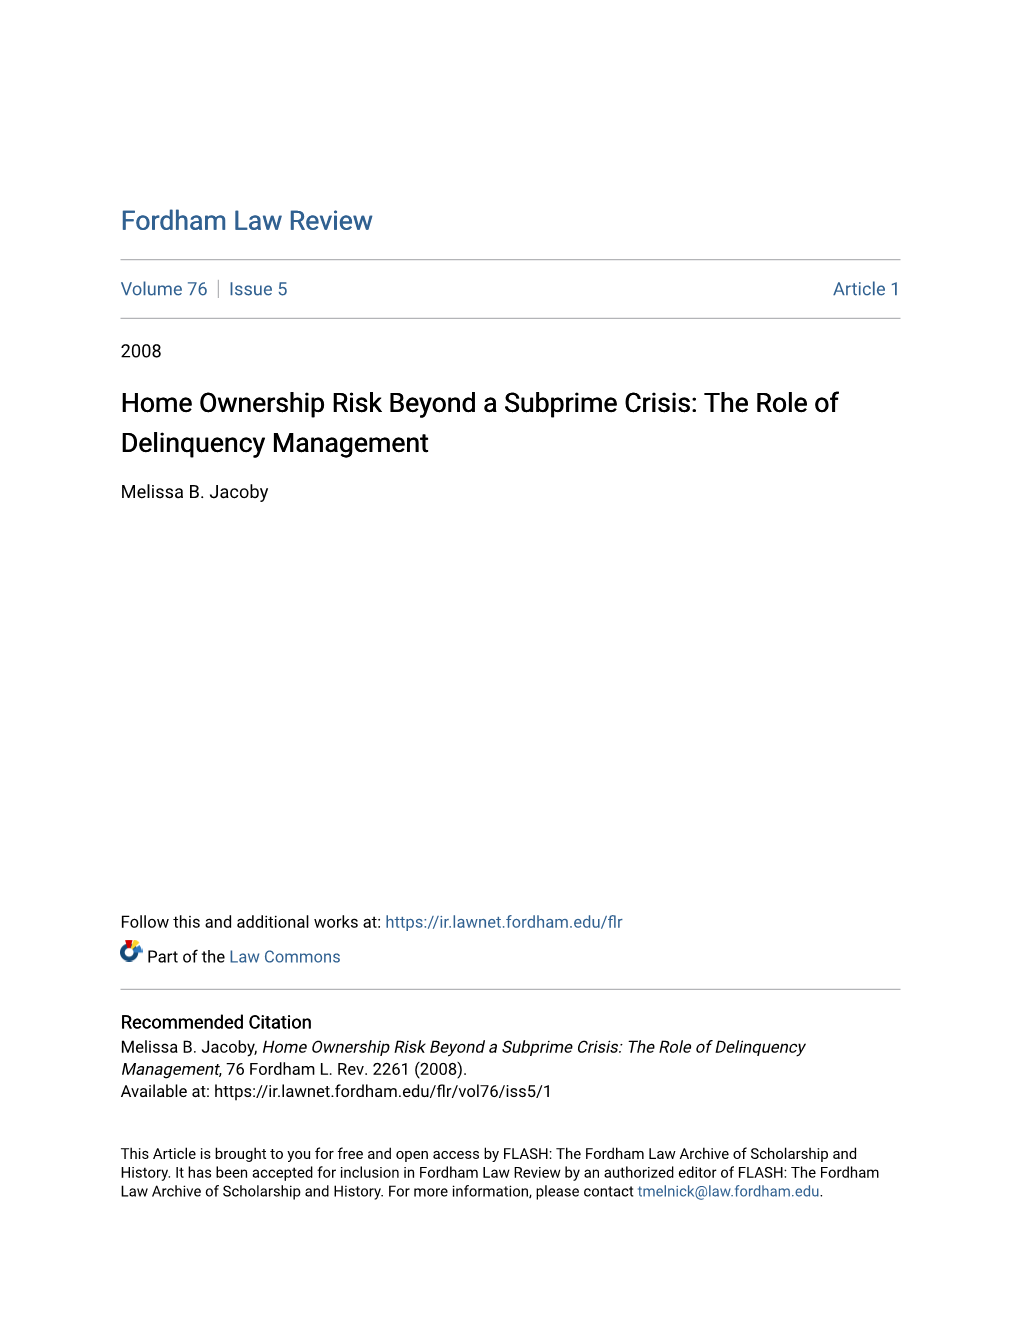 Home Ownership Risk Beyond a Subprime Crisis: the Role of Delinquency Management